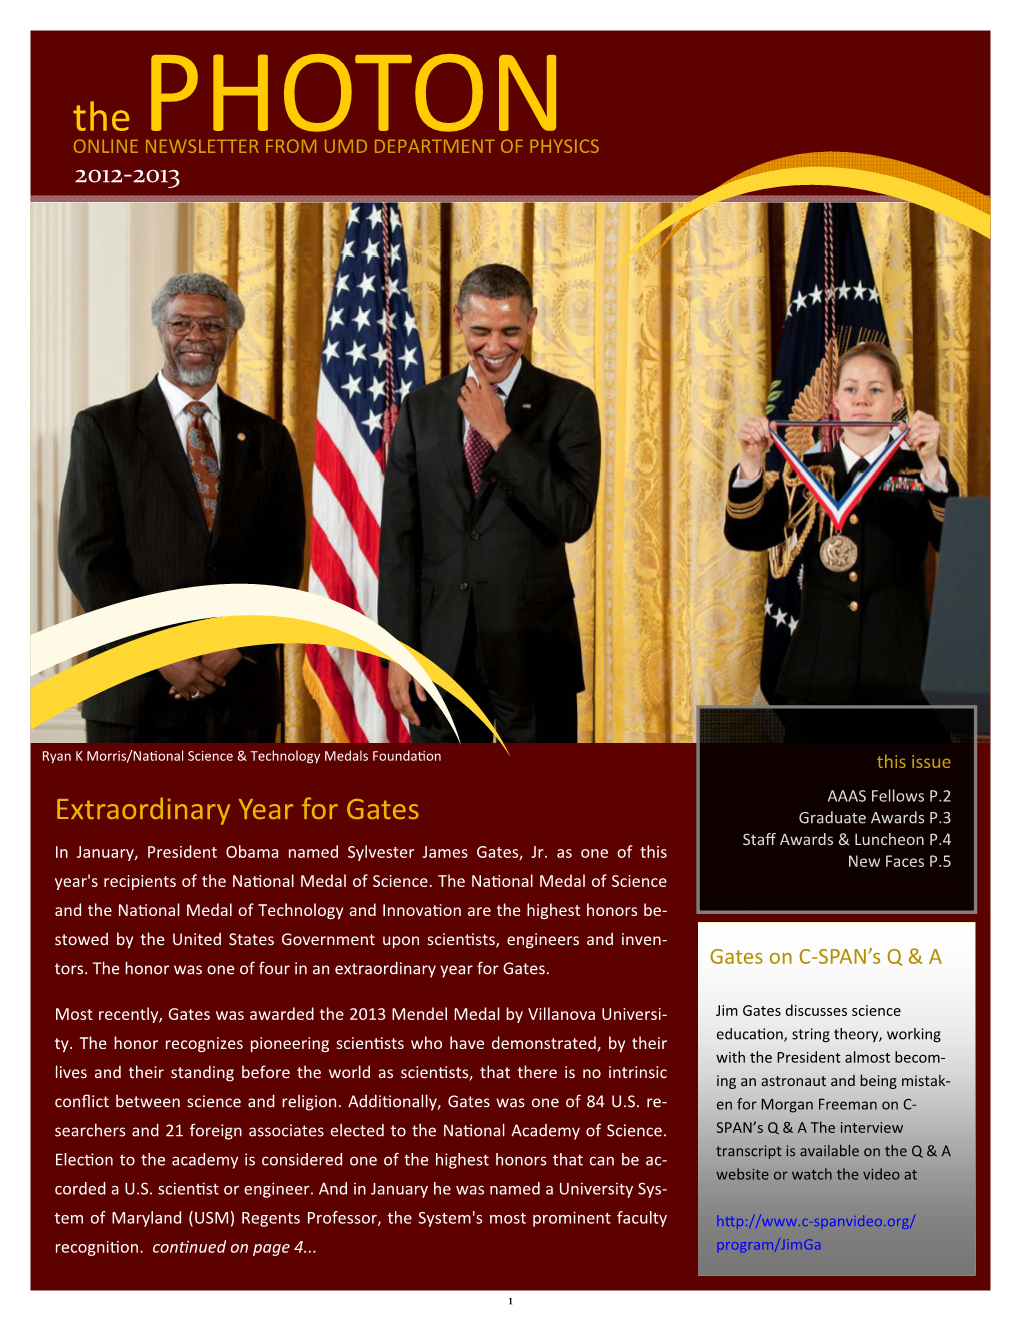 Extraordinary Year for Gates Graduate Awards P.3 Staﬀ Awards & Luncheon P.4 in January, President Obama Named Sylvester James Gates, Jr